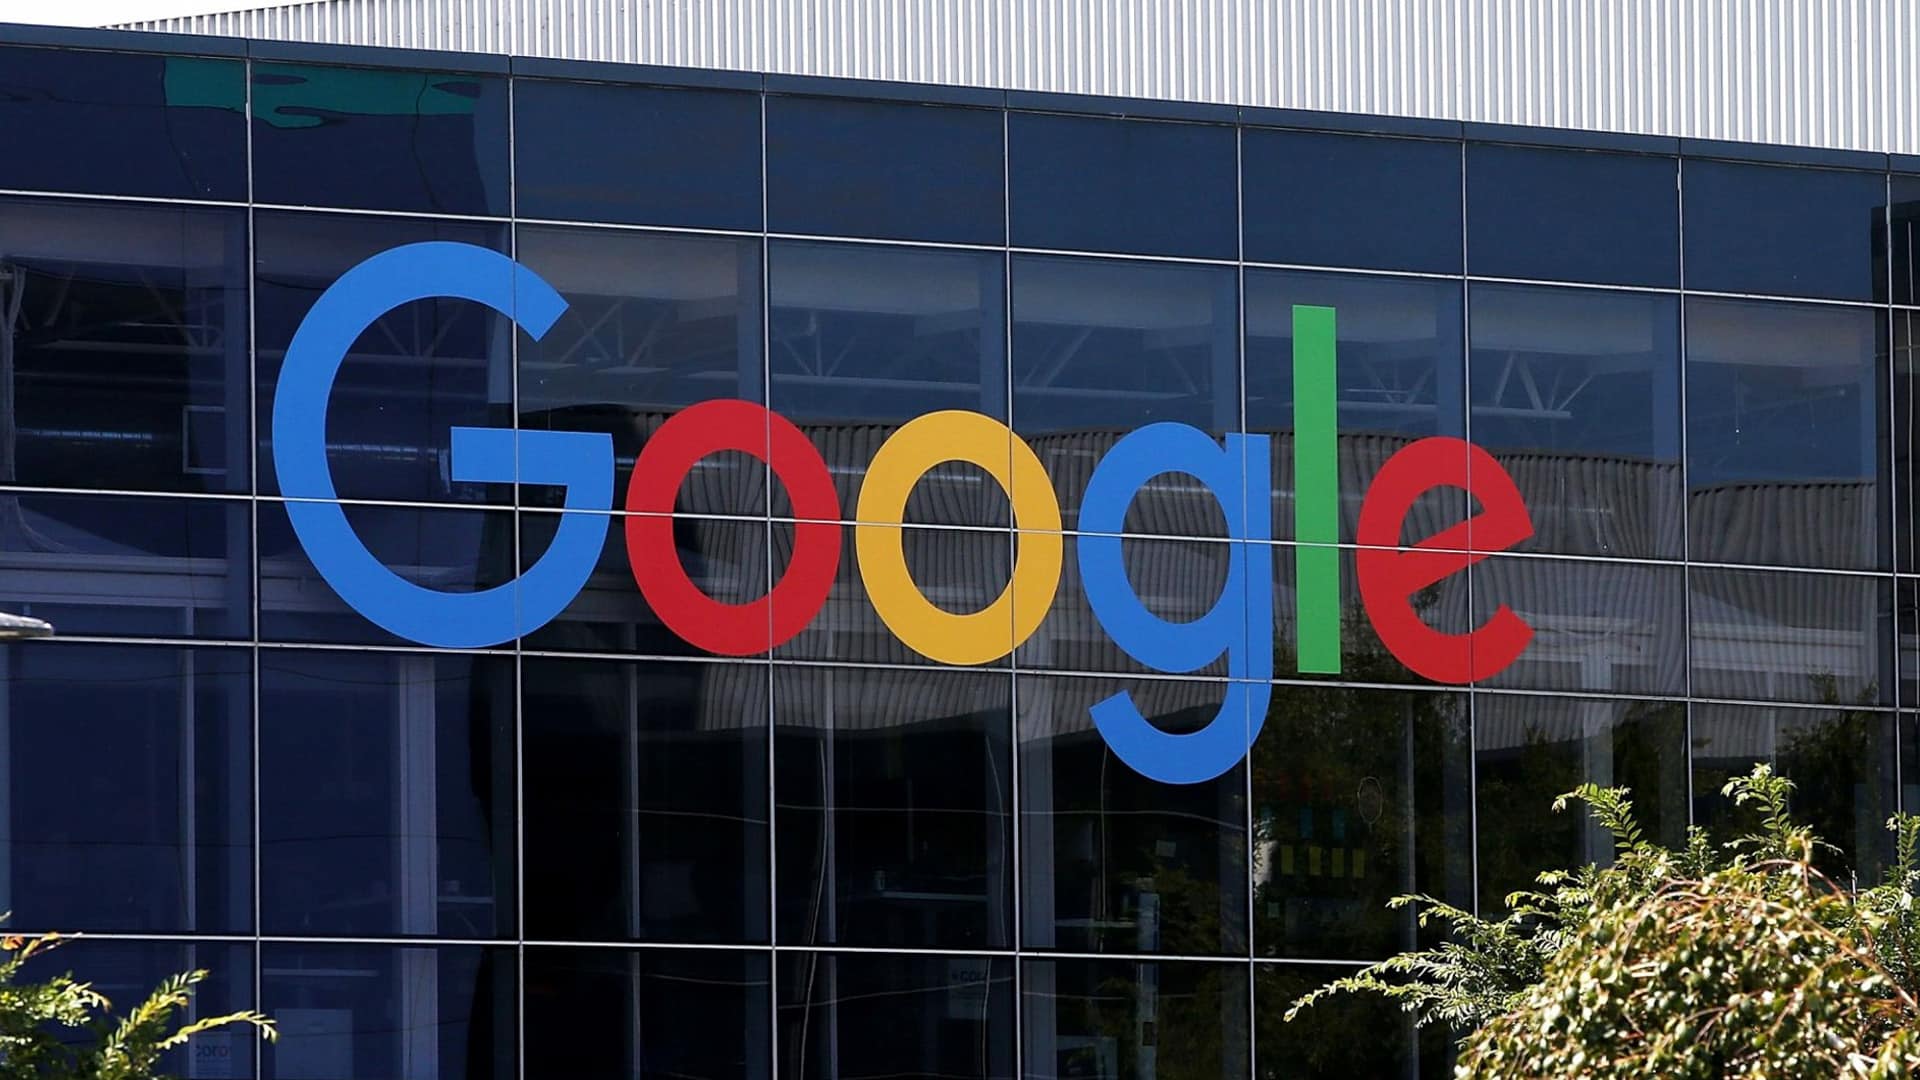 3 Indian non-profits selected for USD 2.5 mn funding from Google.org